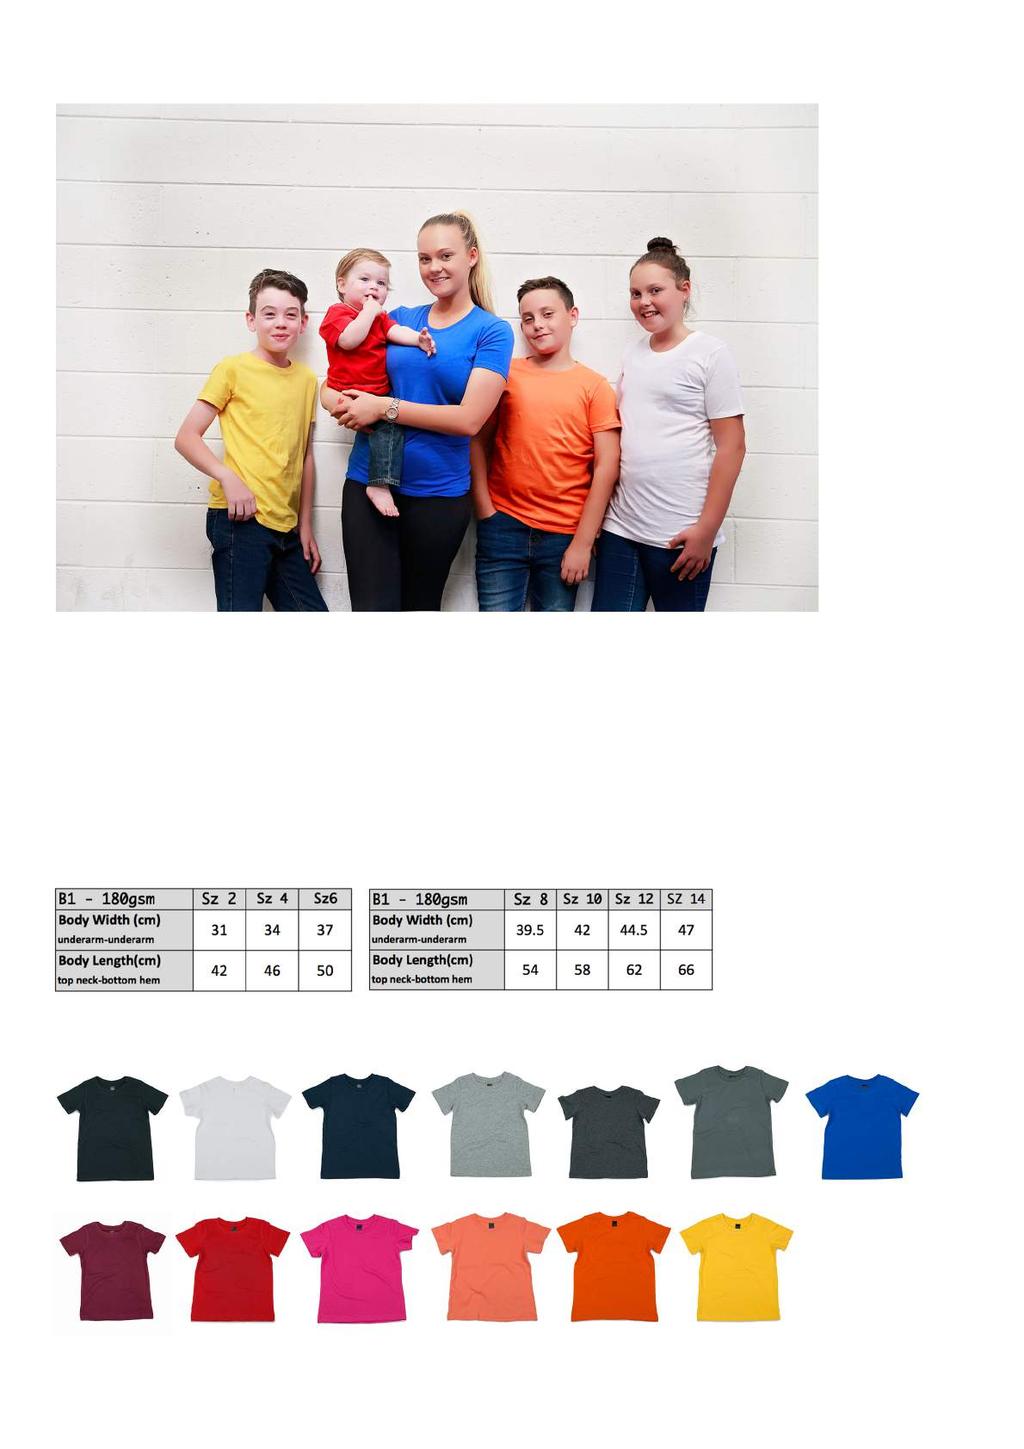 B1 - Childrens T-Shirt Our Childrens T-Shirt style comes in both kids sizing and youth sizing to cater for all ages of childhood.